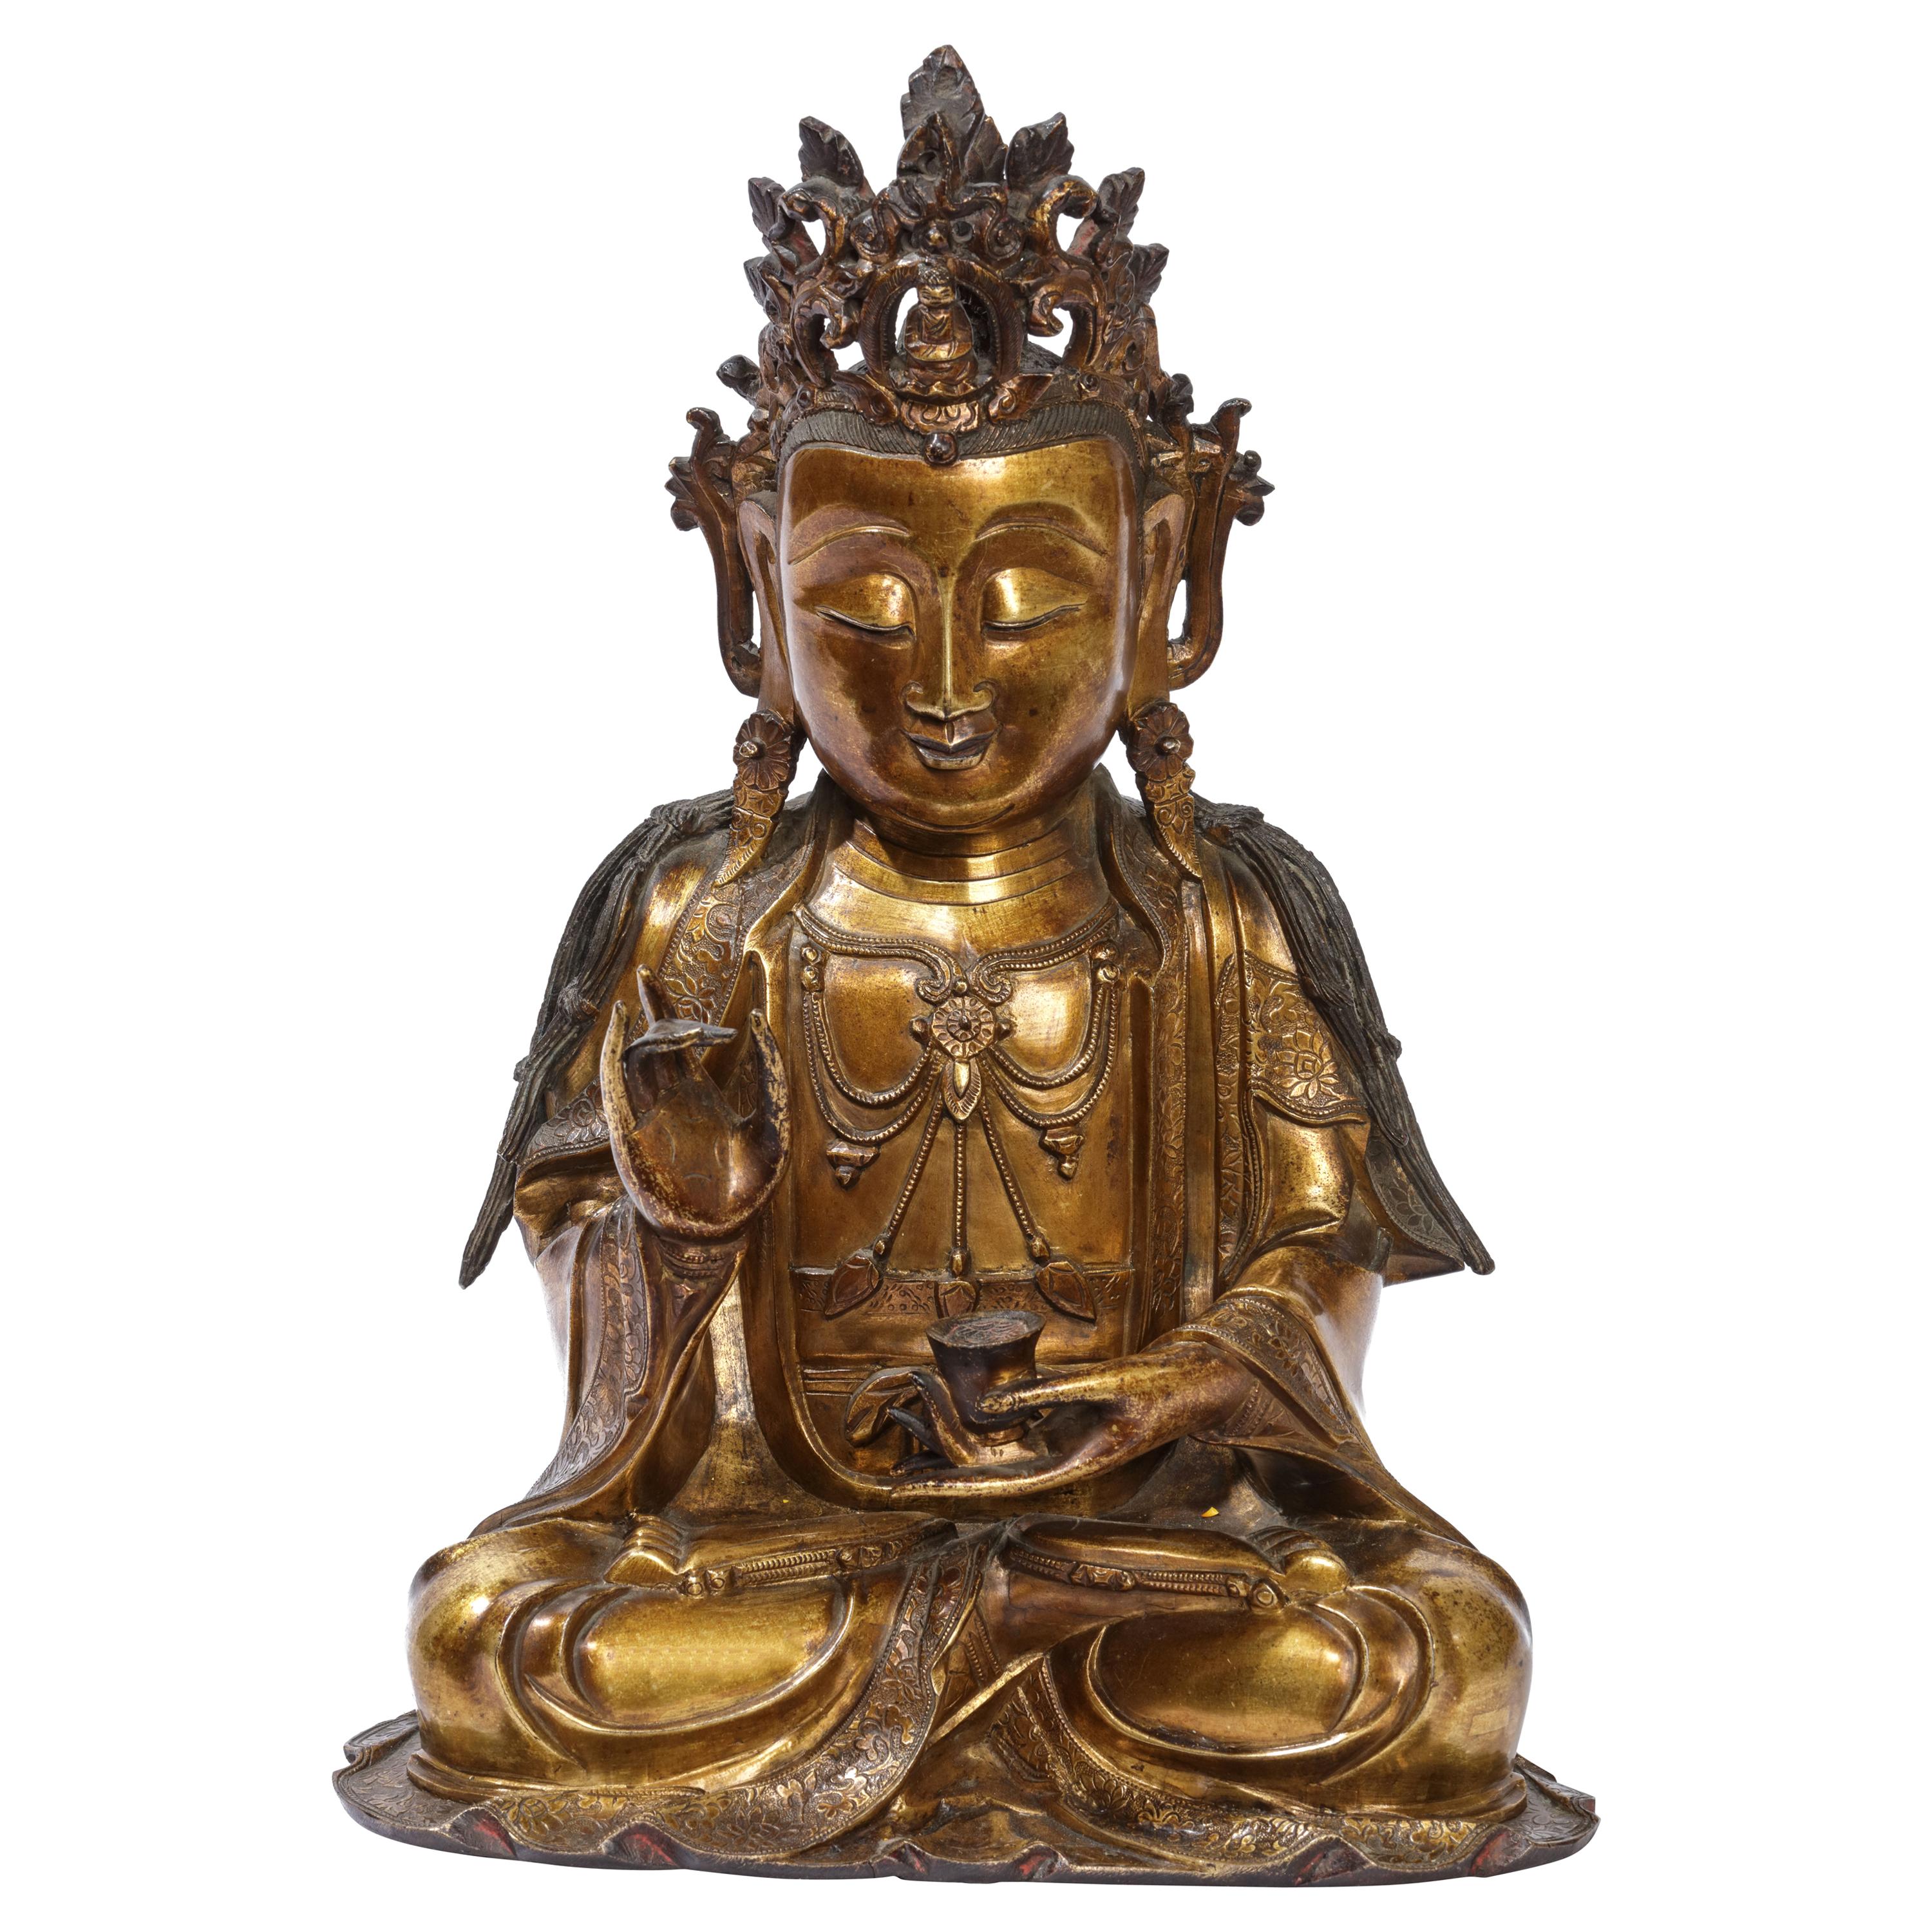 Very Fine and Serene Chinese Gilt-Bronze Figure of Guanyin, 16th Century